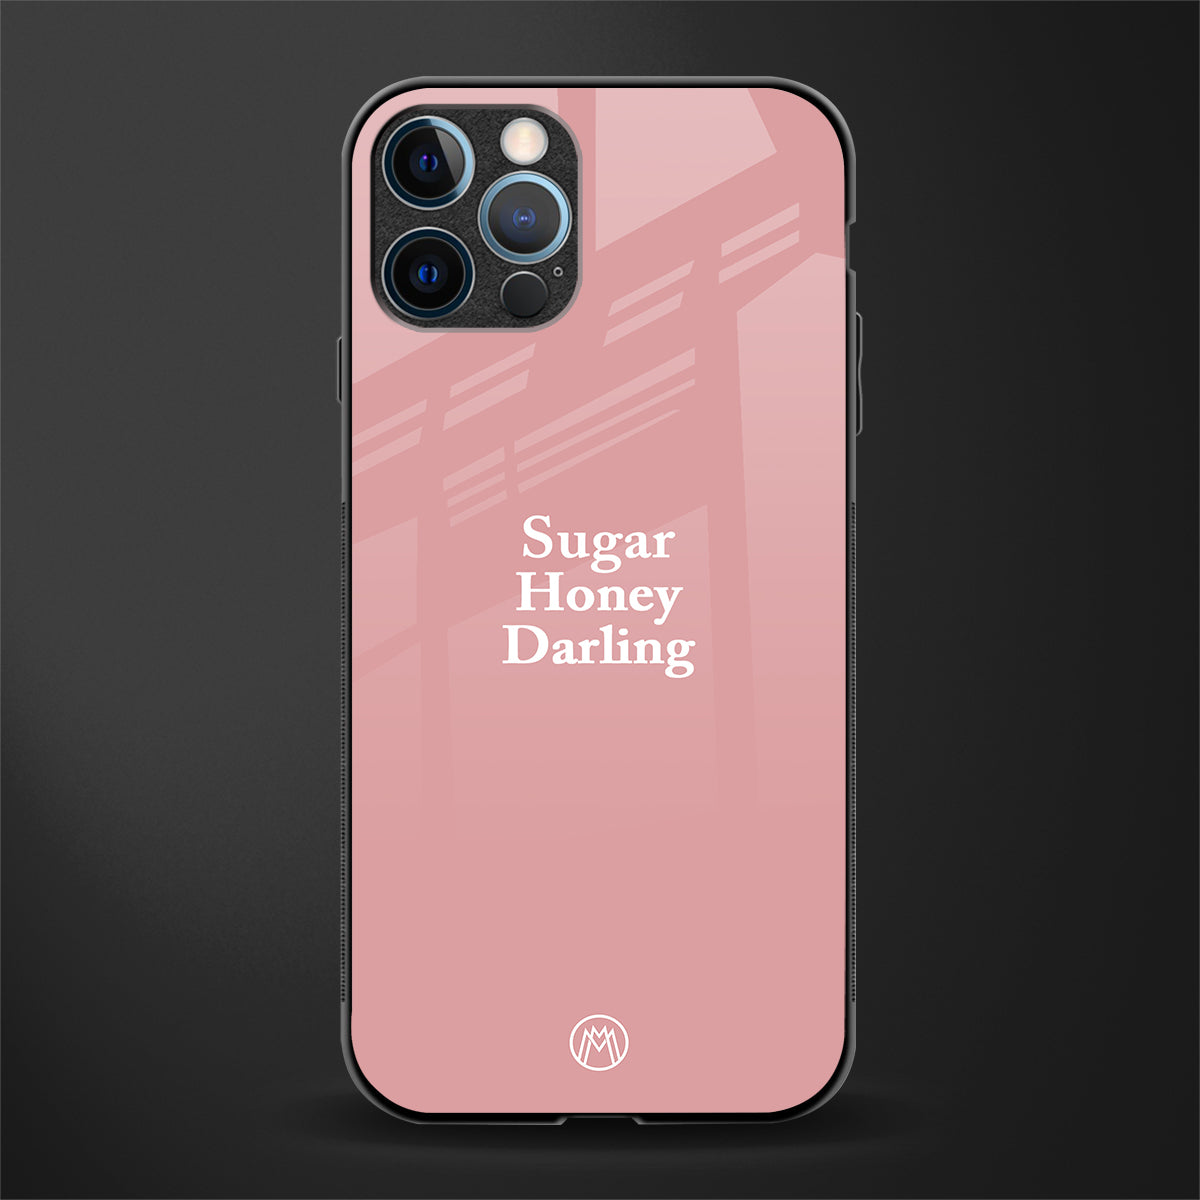 suger honey darling glass case for iphone 12 pro max image